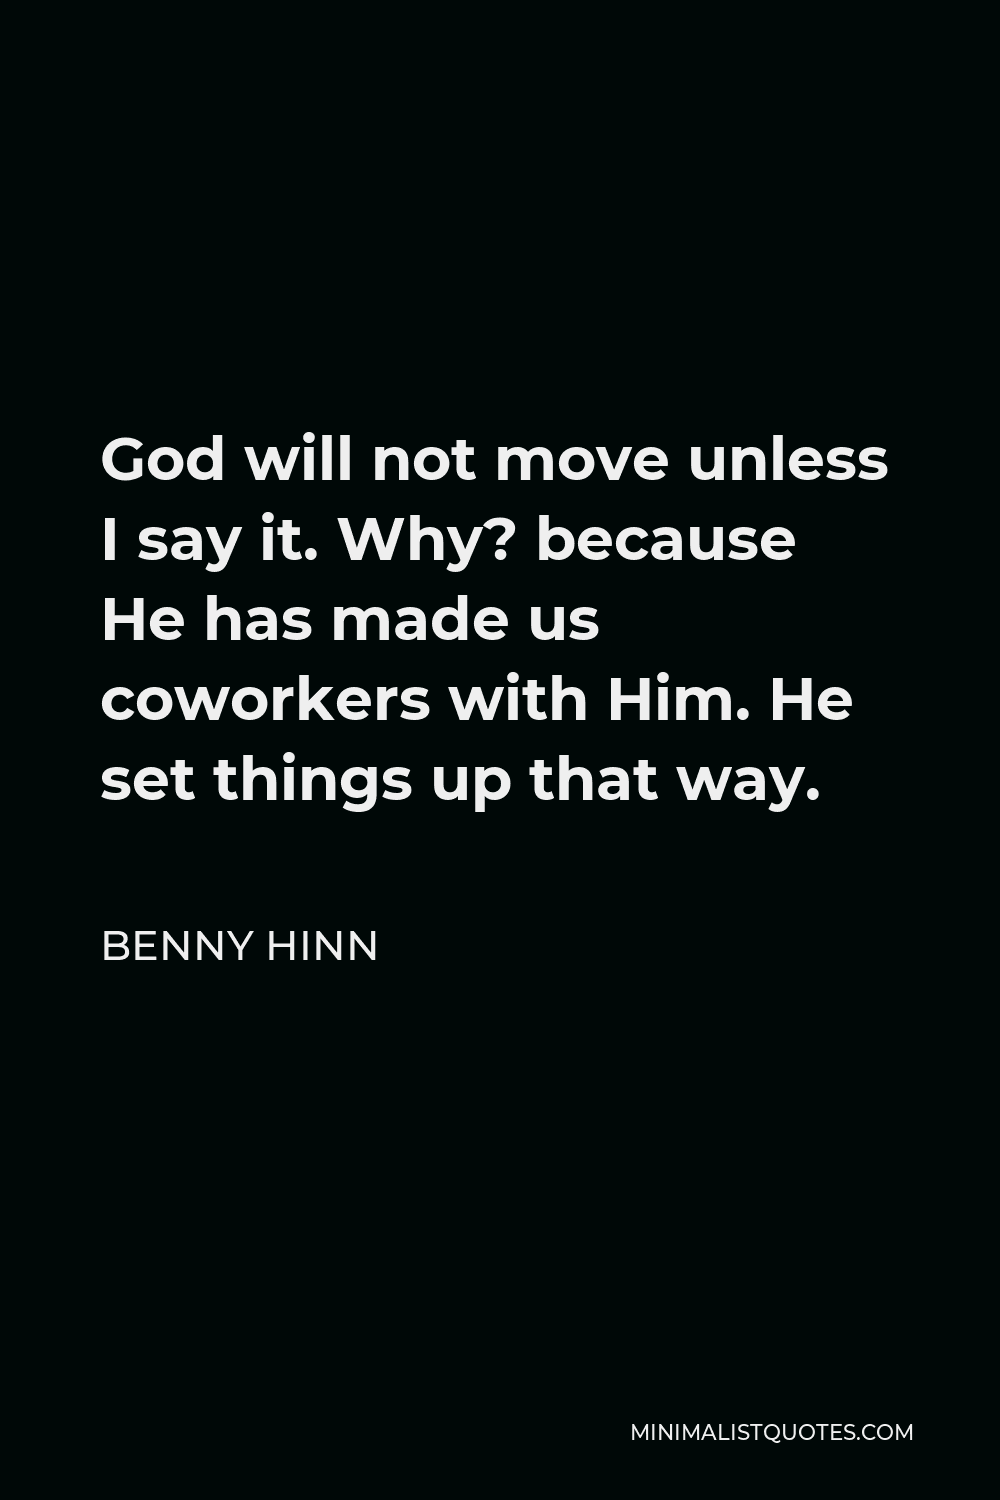 Benny Hinn Quote - God will not move unless I say it. Why? because He has made us coworkers with Him. He set things up that way.